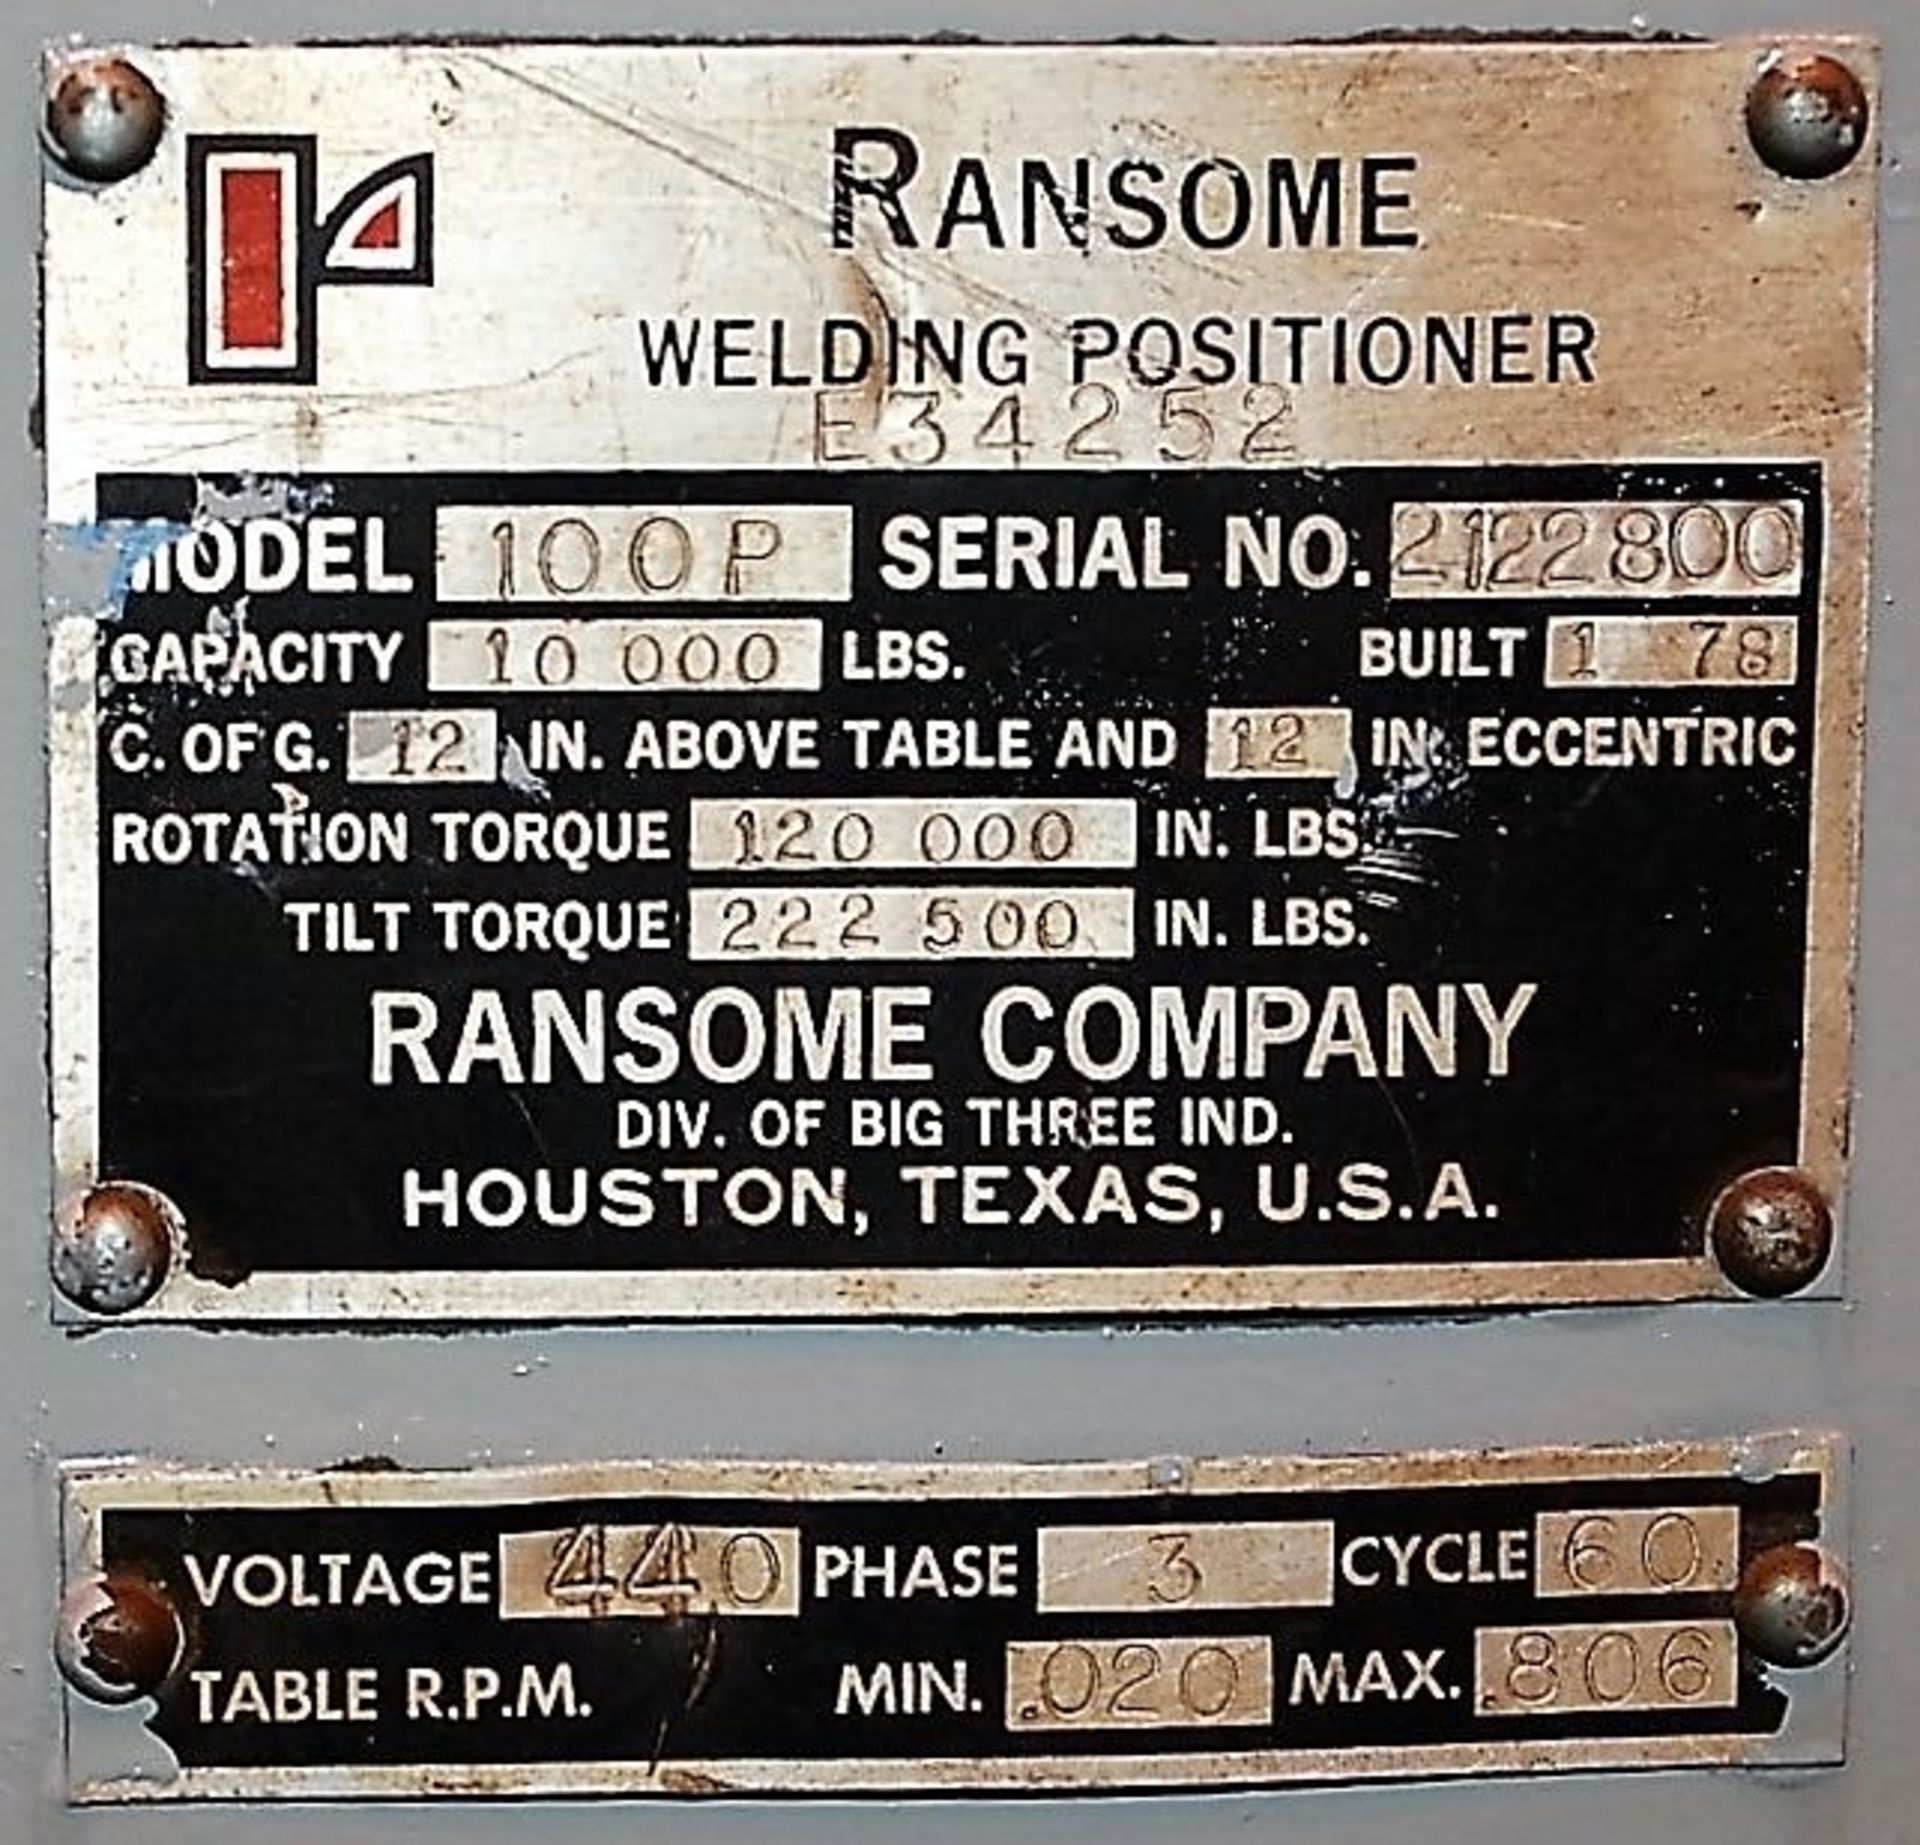 Ransome 100P 10,000 Lb. Welding Positioner - Image 6 of 6